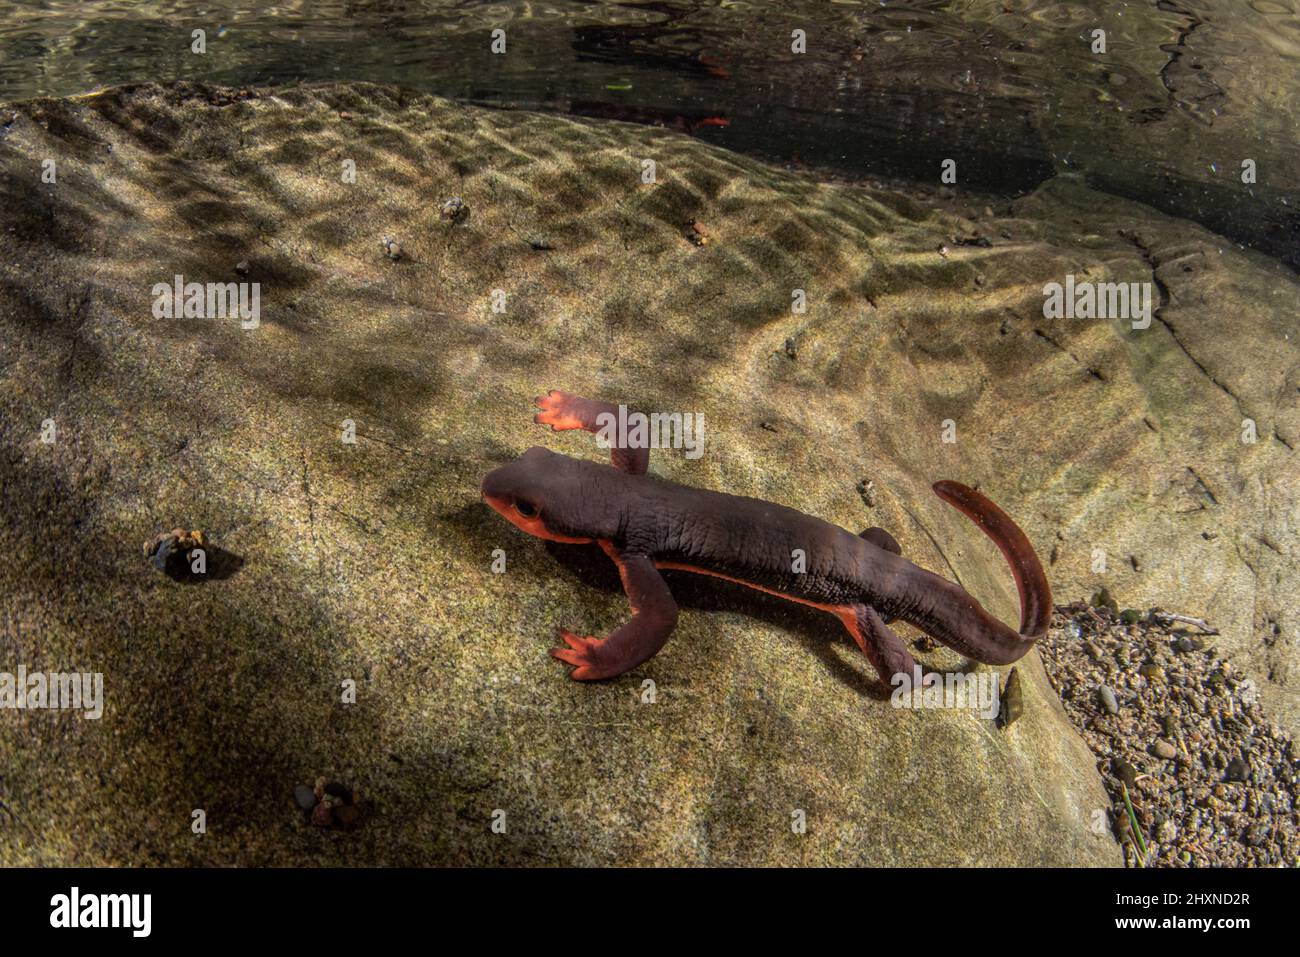 Red bellied newt (Taricha rivularis) a aquatic salamander from Northern California, they live in clean flowing streams. Stock Photo